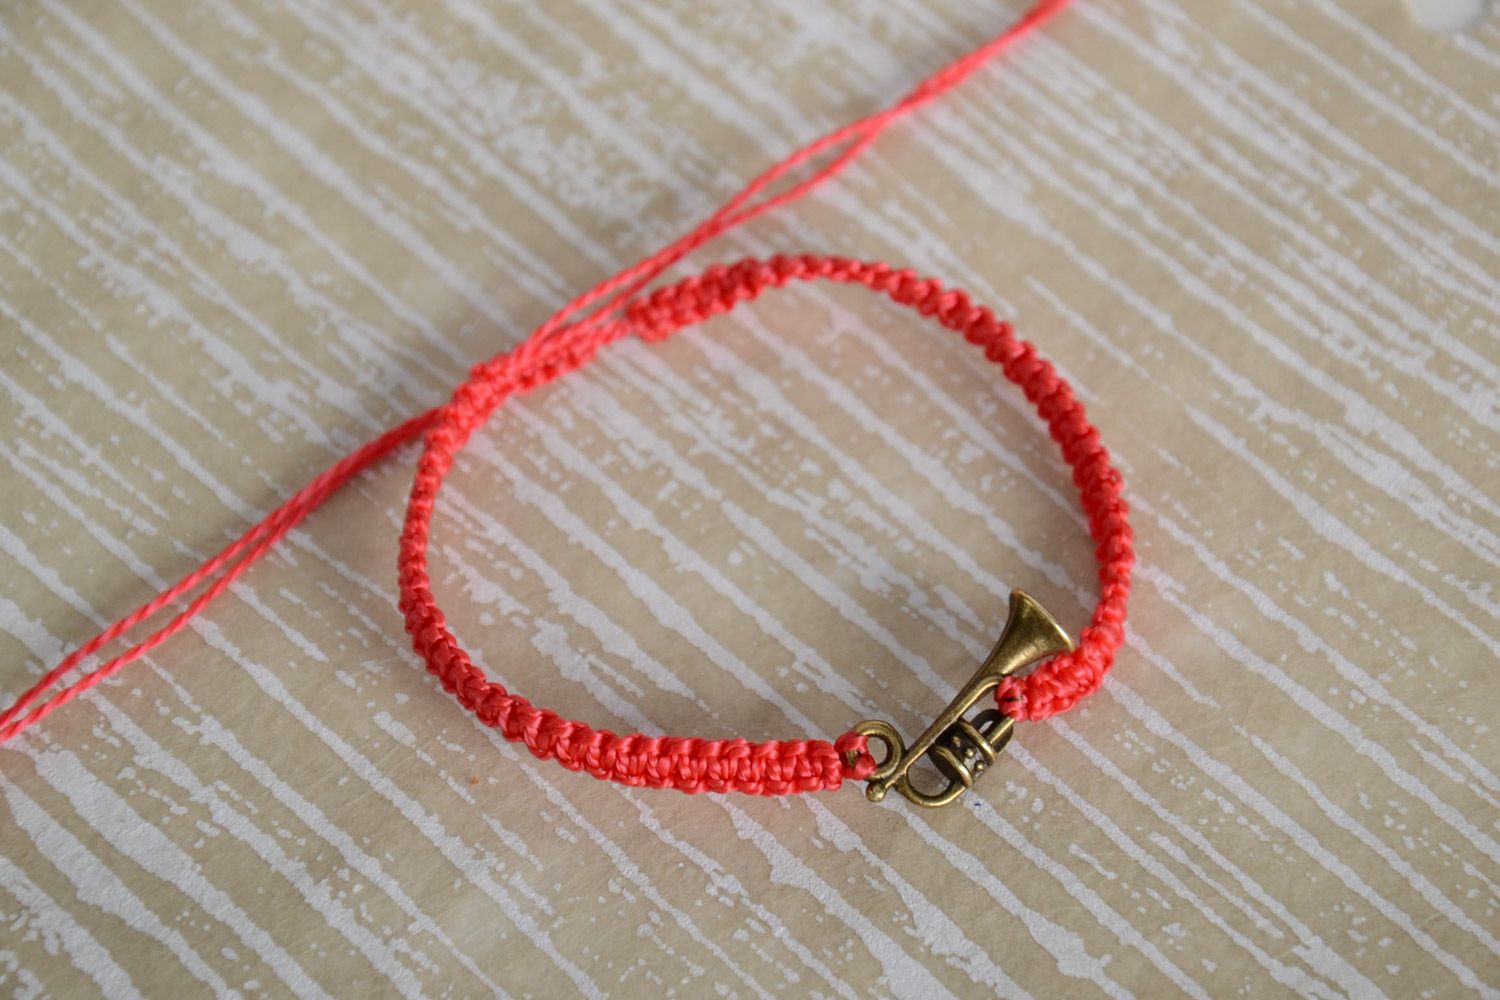 Handmade red woven capron thread bracelet with metal charm in the shape of saxophone photo 1